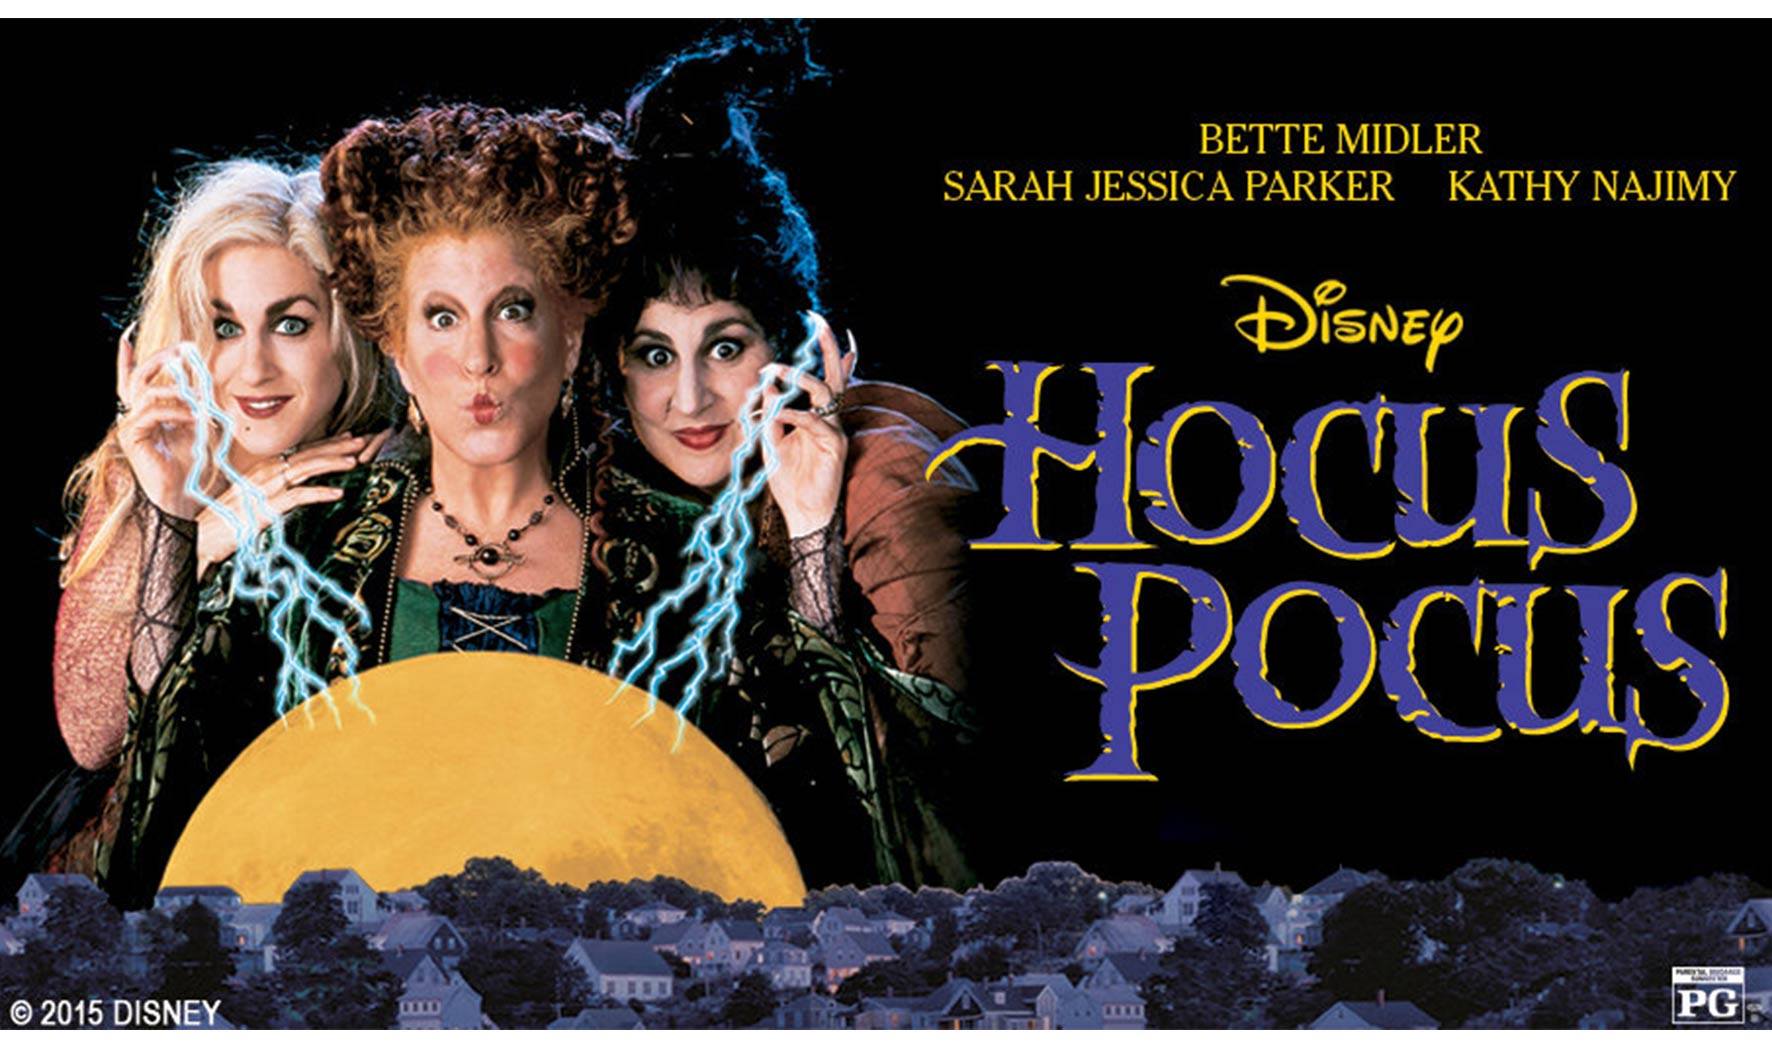 This is the cover for the cult movie hocus pocus part 1.